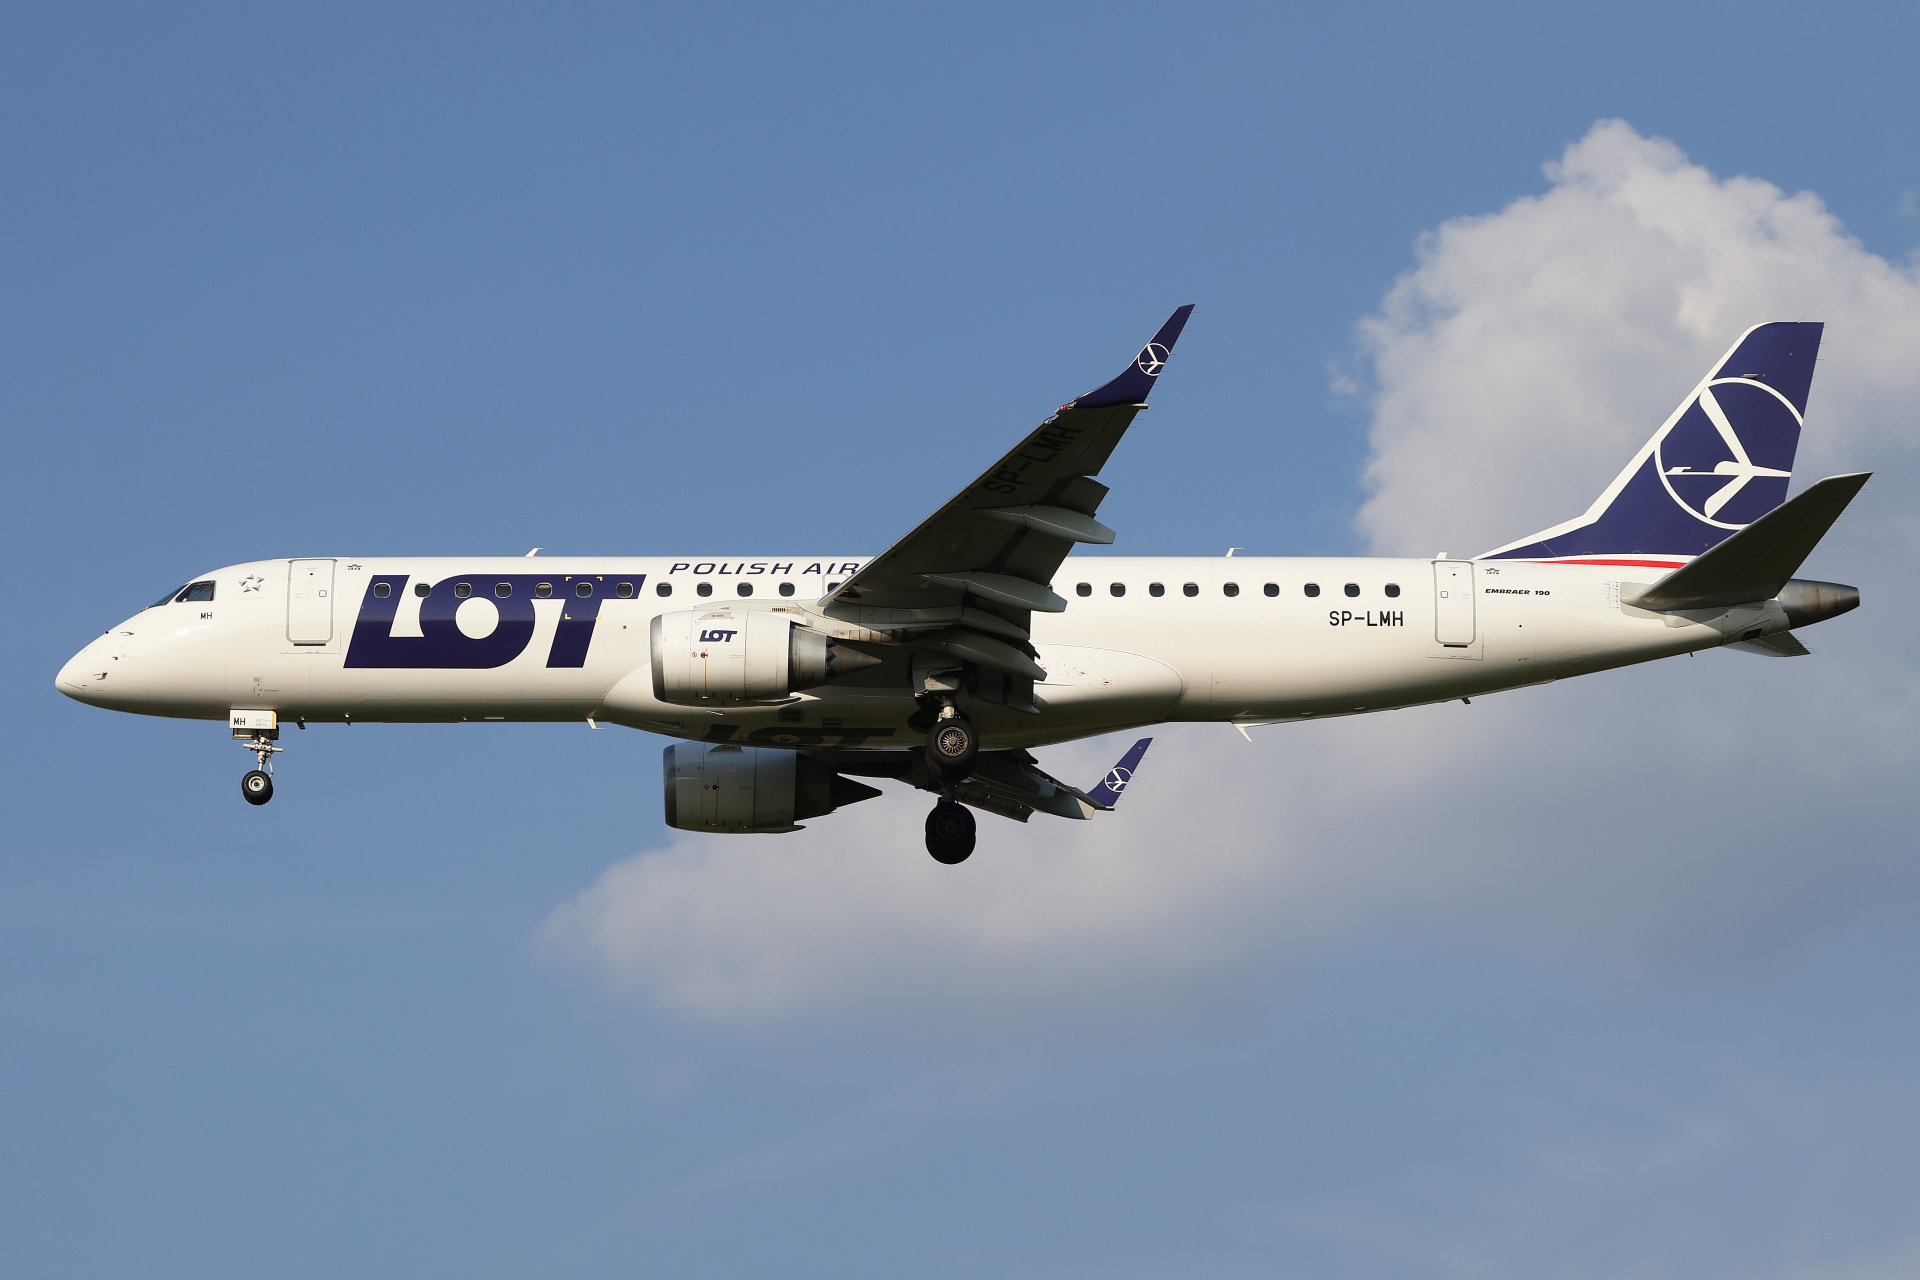 SP-LMH (Aircraft » EPWA Spotting » Embraer E190 » LOT Polish Airlines)